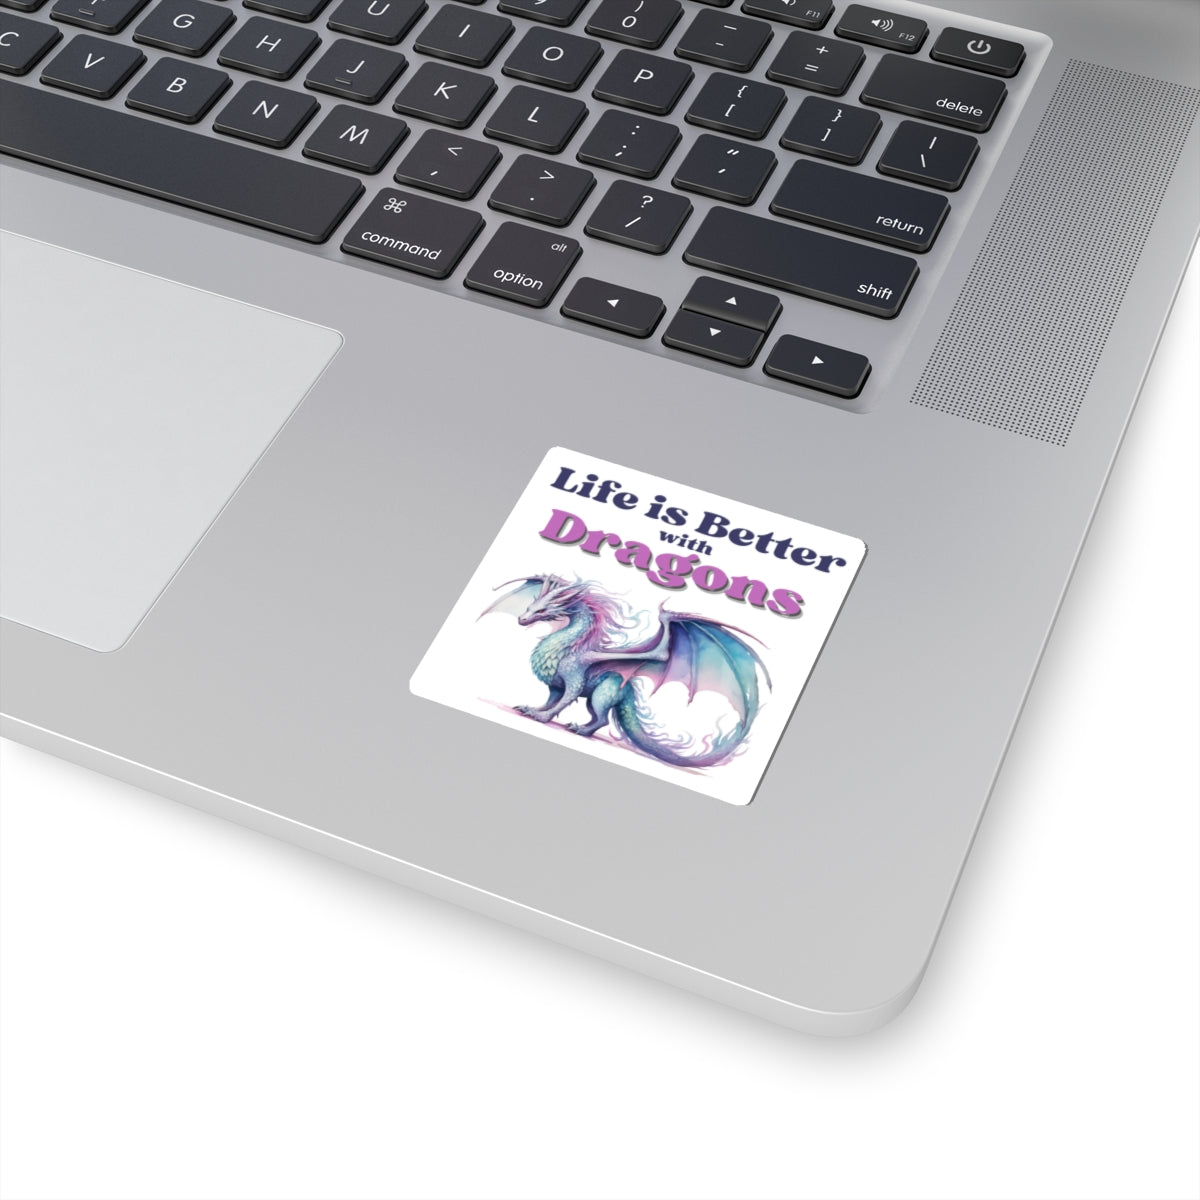 Life is Better with Dragons, Kiss-Cut Sticker